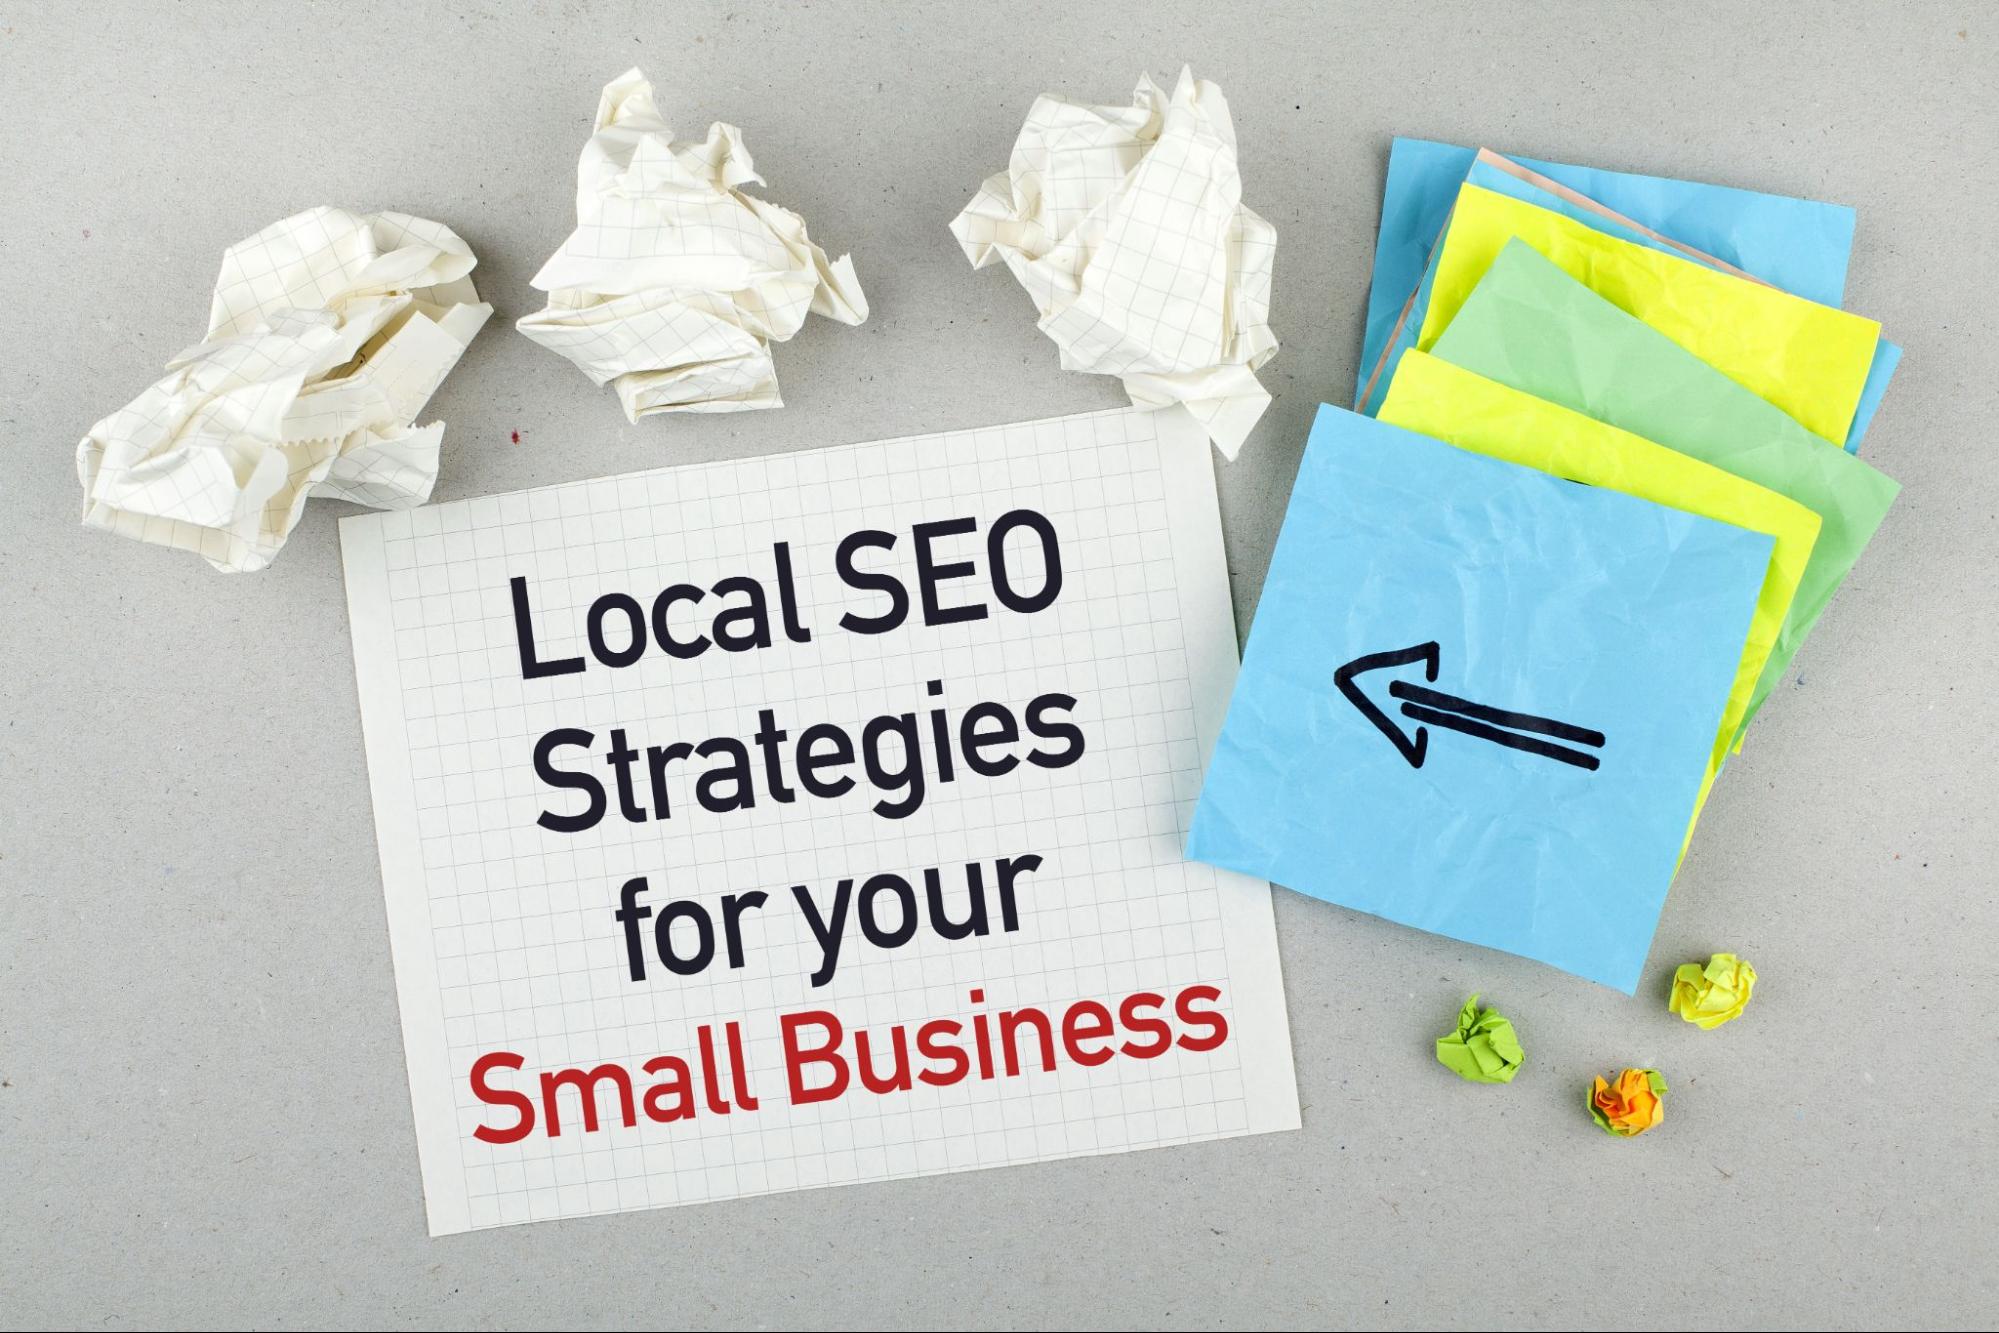 How Businesses Can Use these Local SEO Tactics to Rank Higher on Google